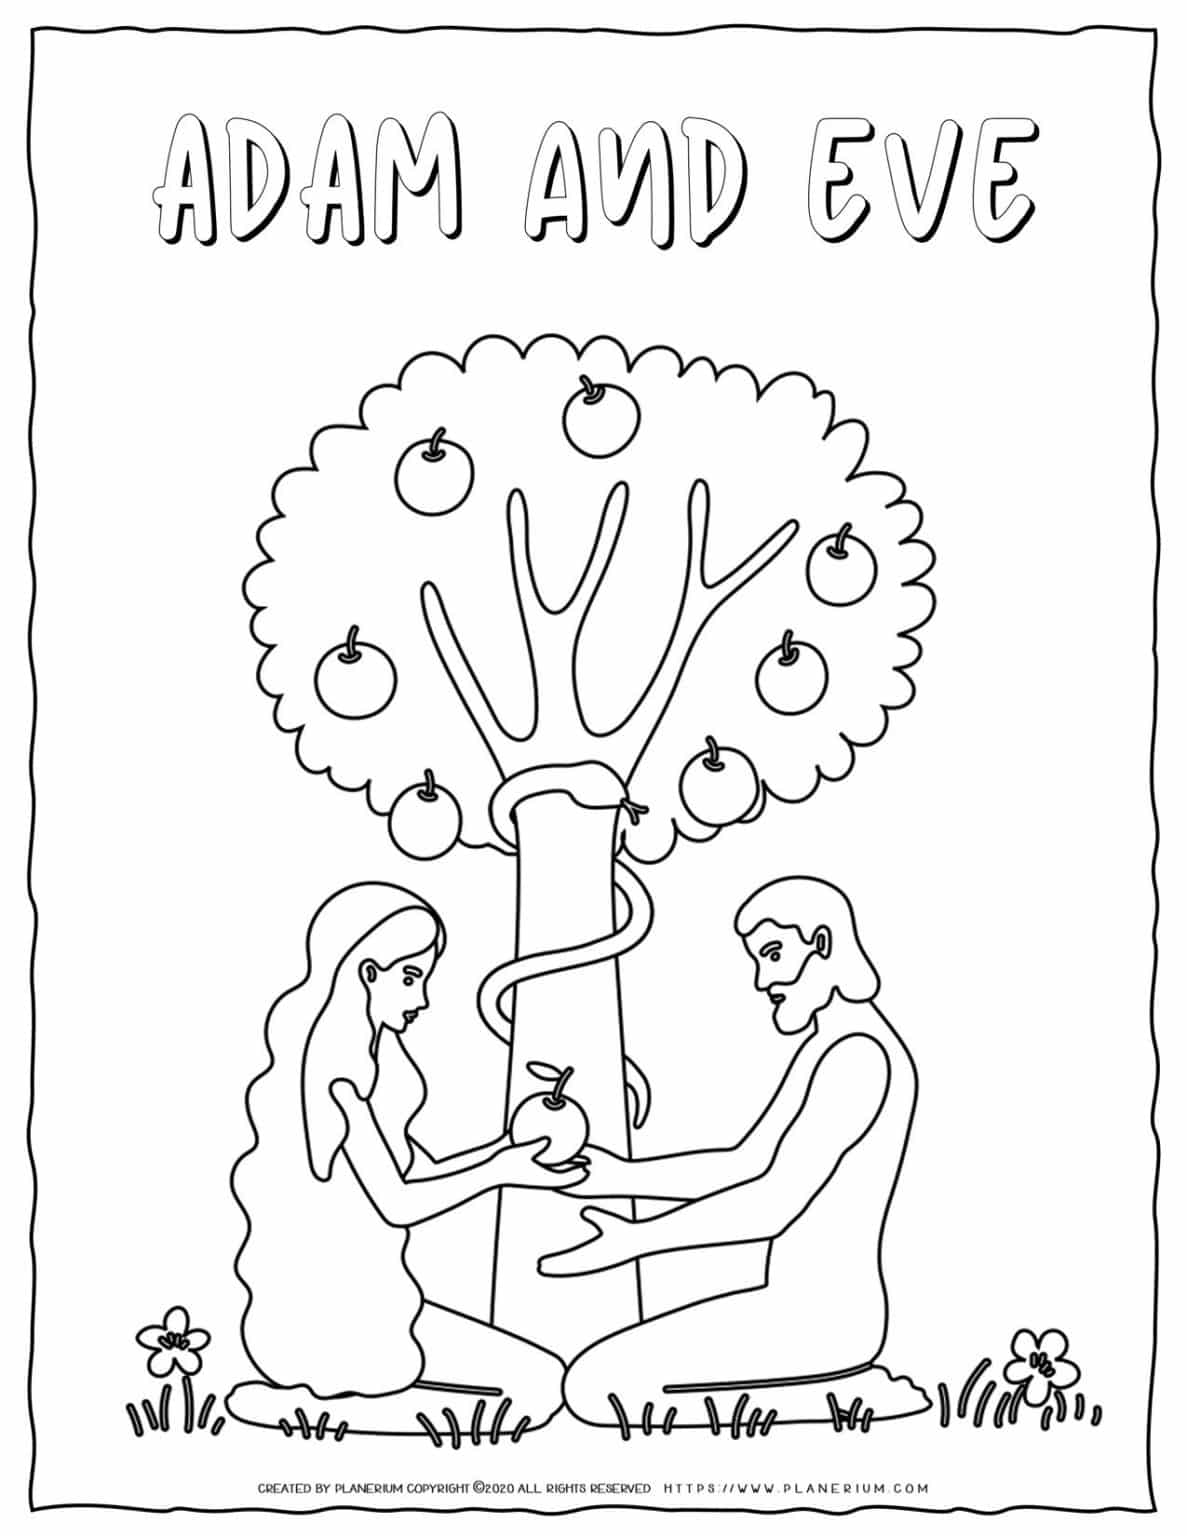 adam-and-eve-bible-coloring-pages-planerium